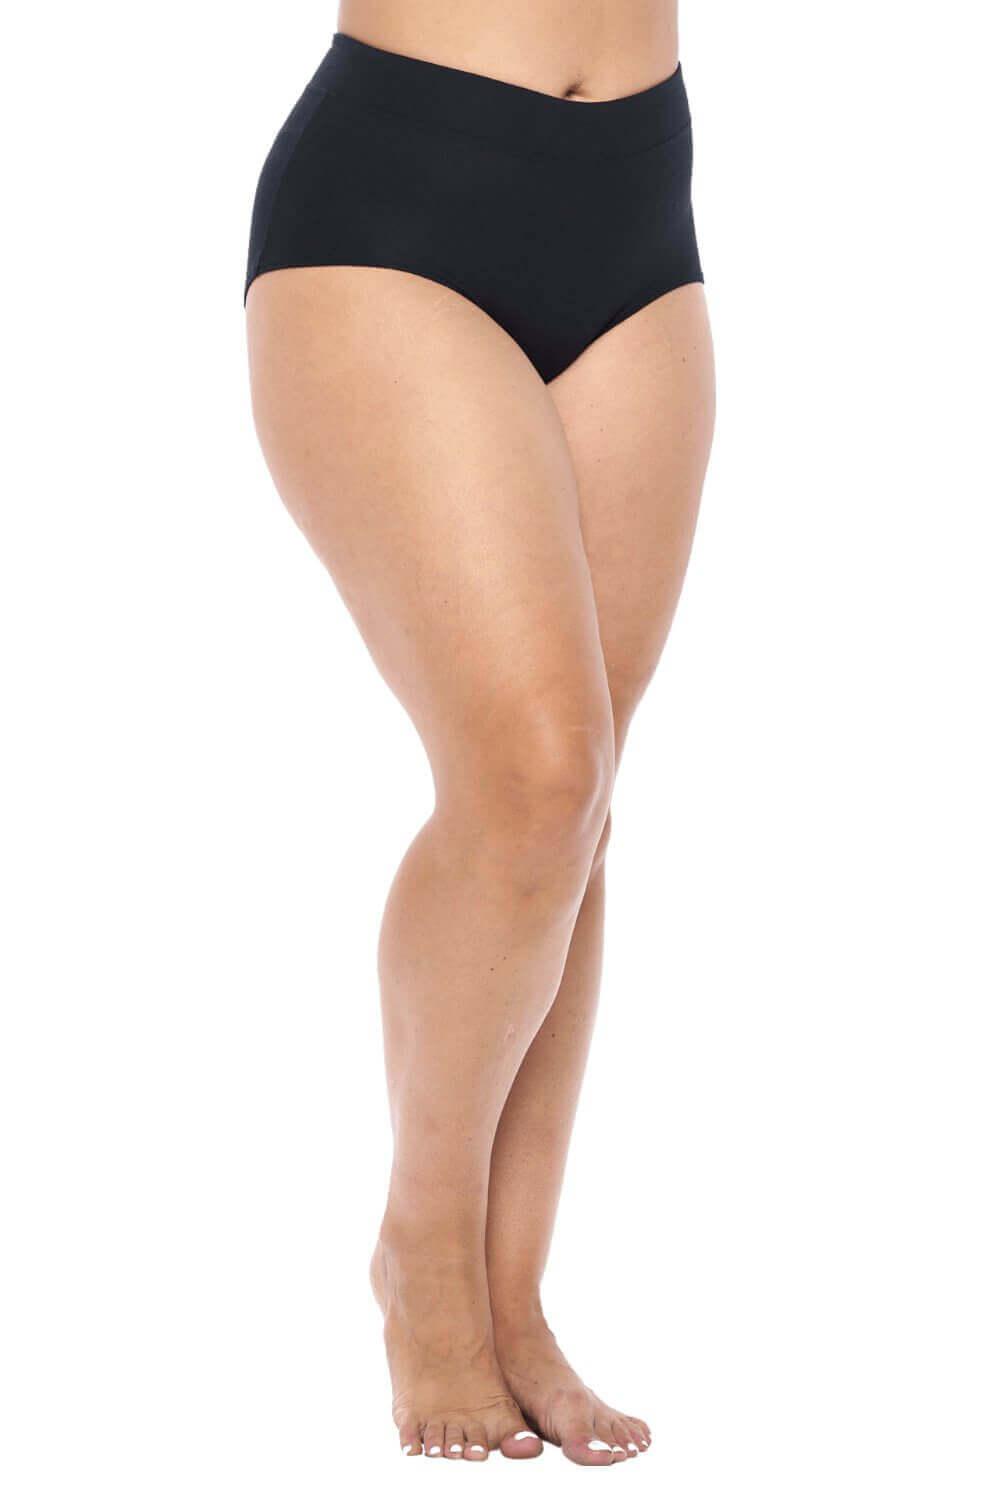 Close-Fitting Comfortable Sweat-Absorbing Home Underwear